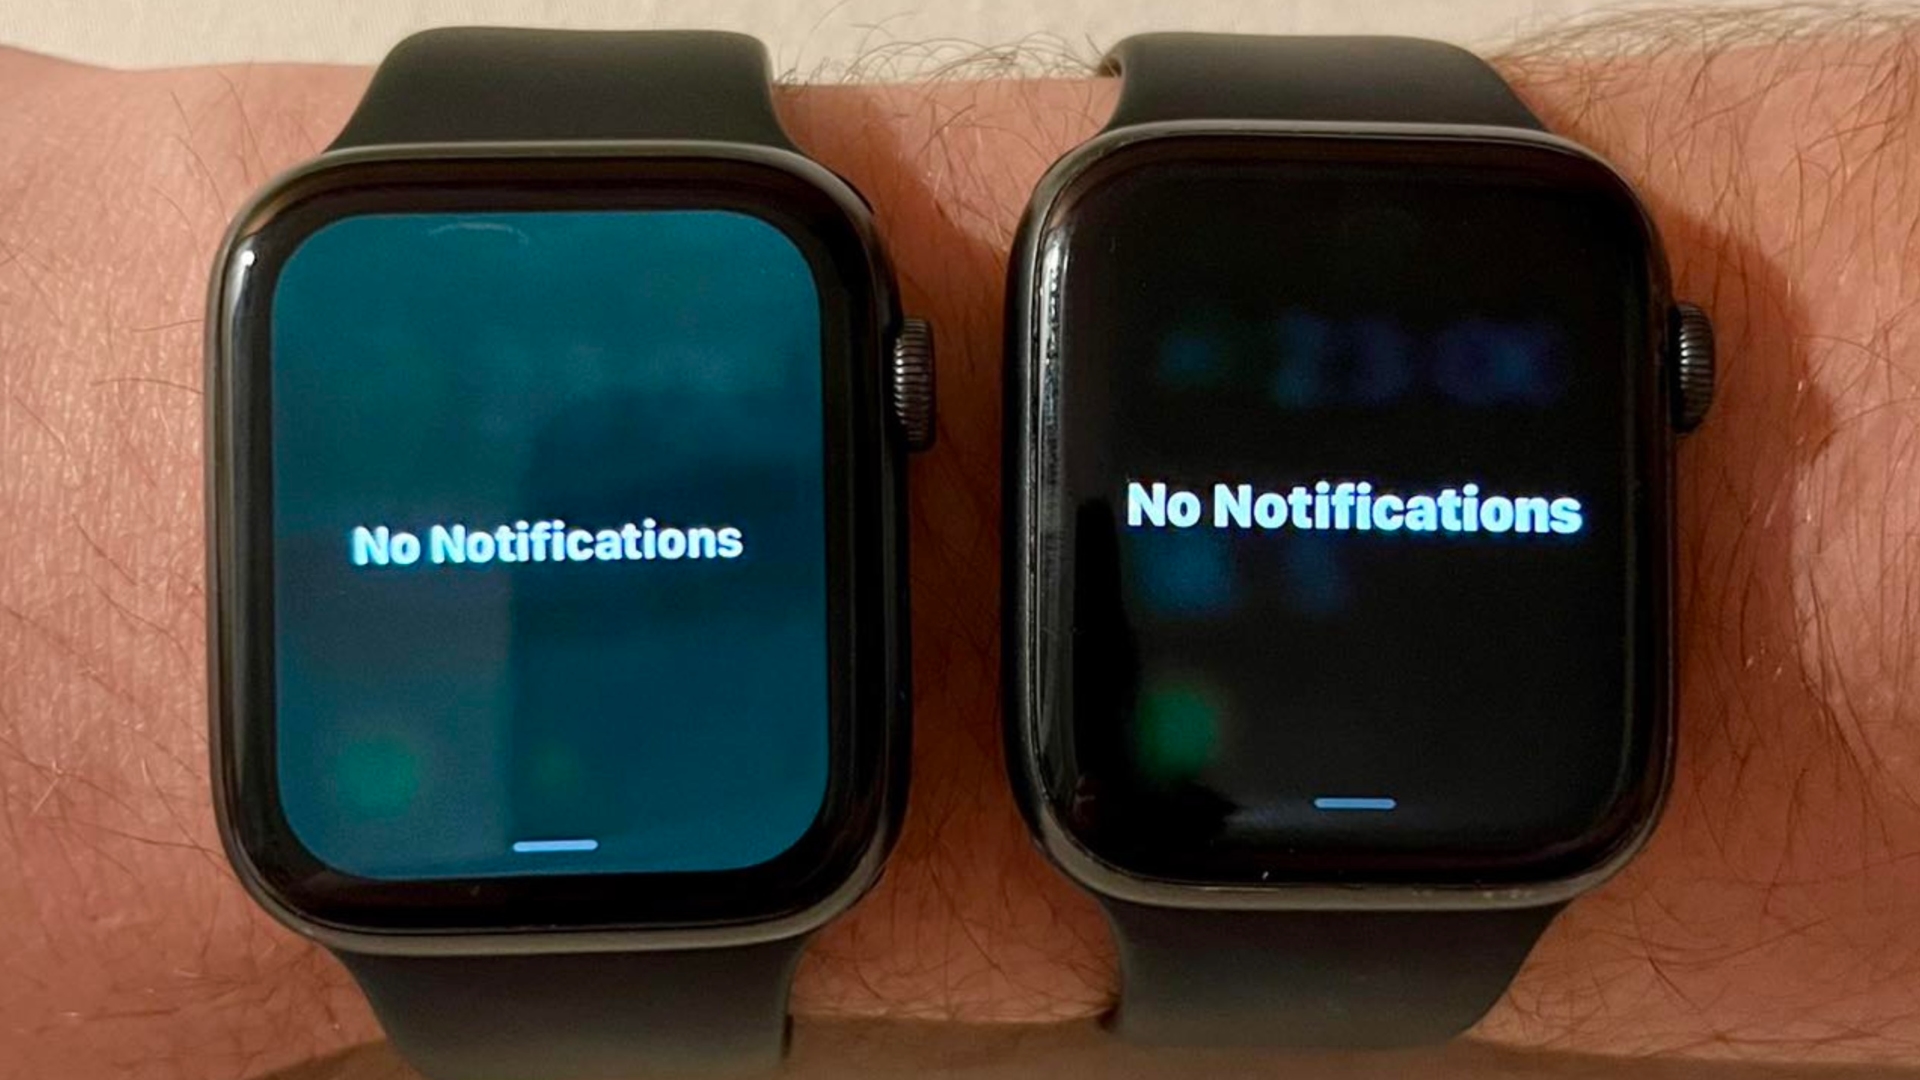 https://www.reddit.com/r/watchos/comments/13lbin0/green_tint_in_notification_control_center_after/